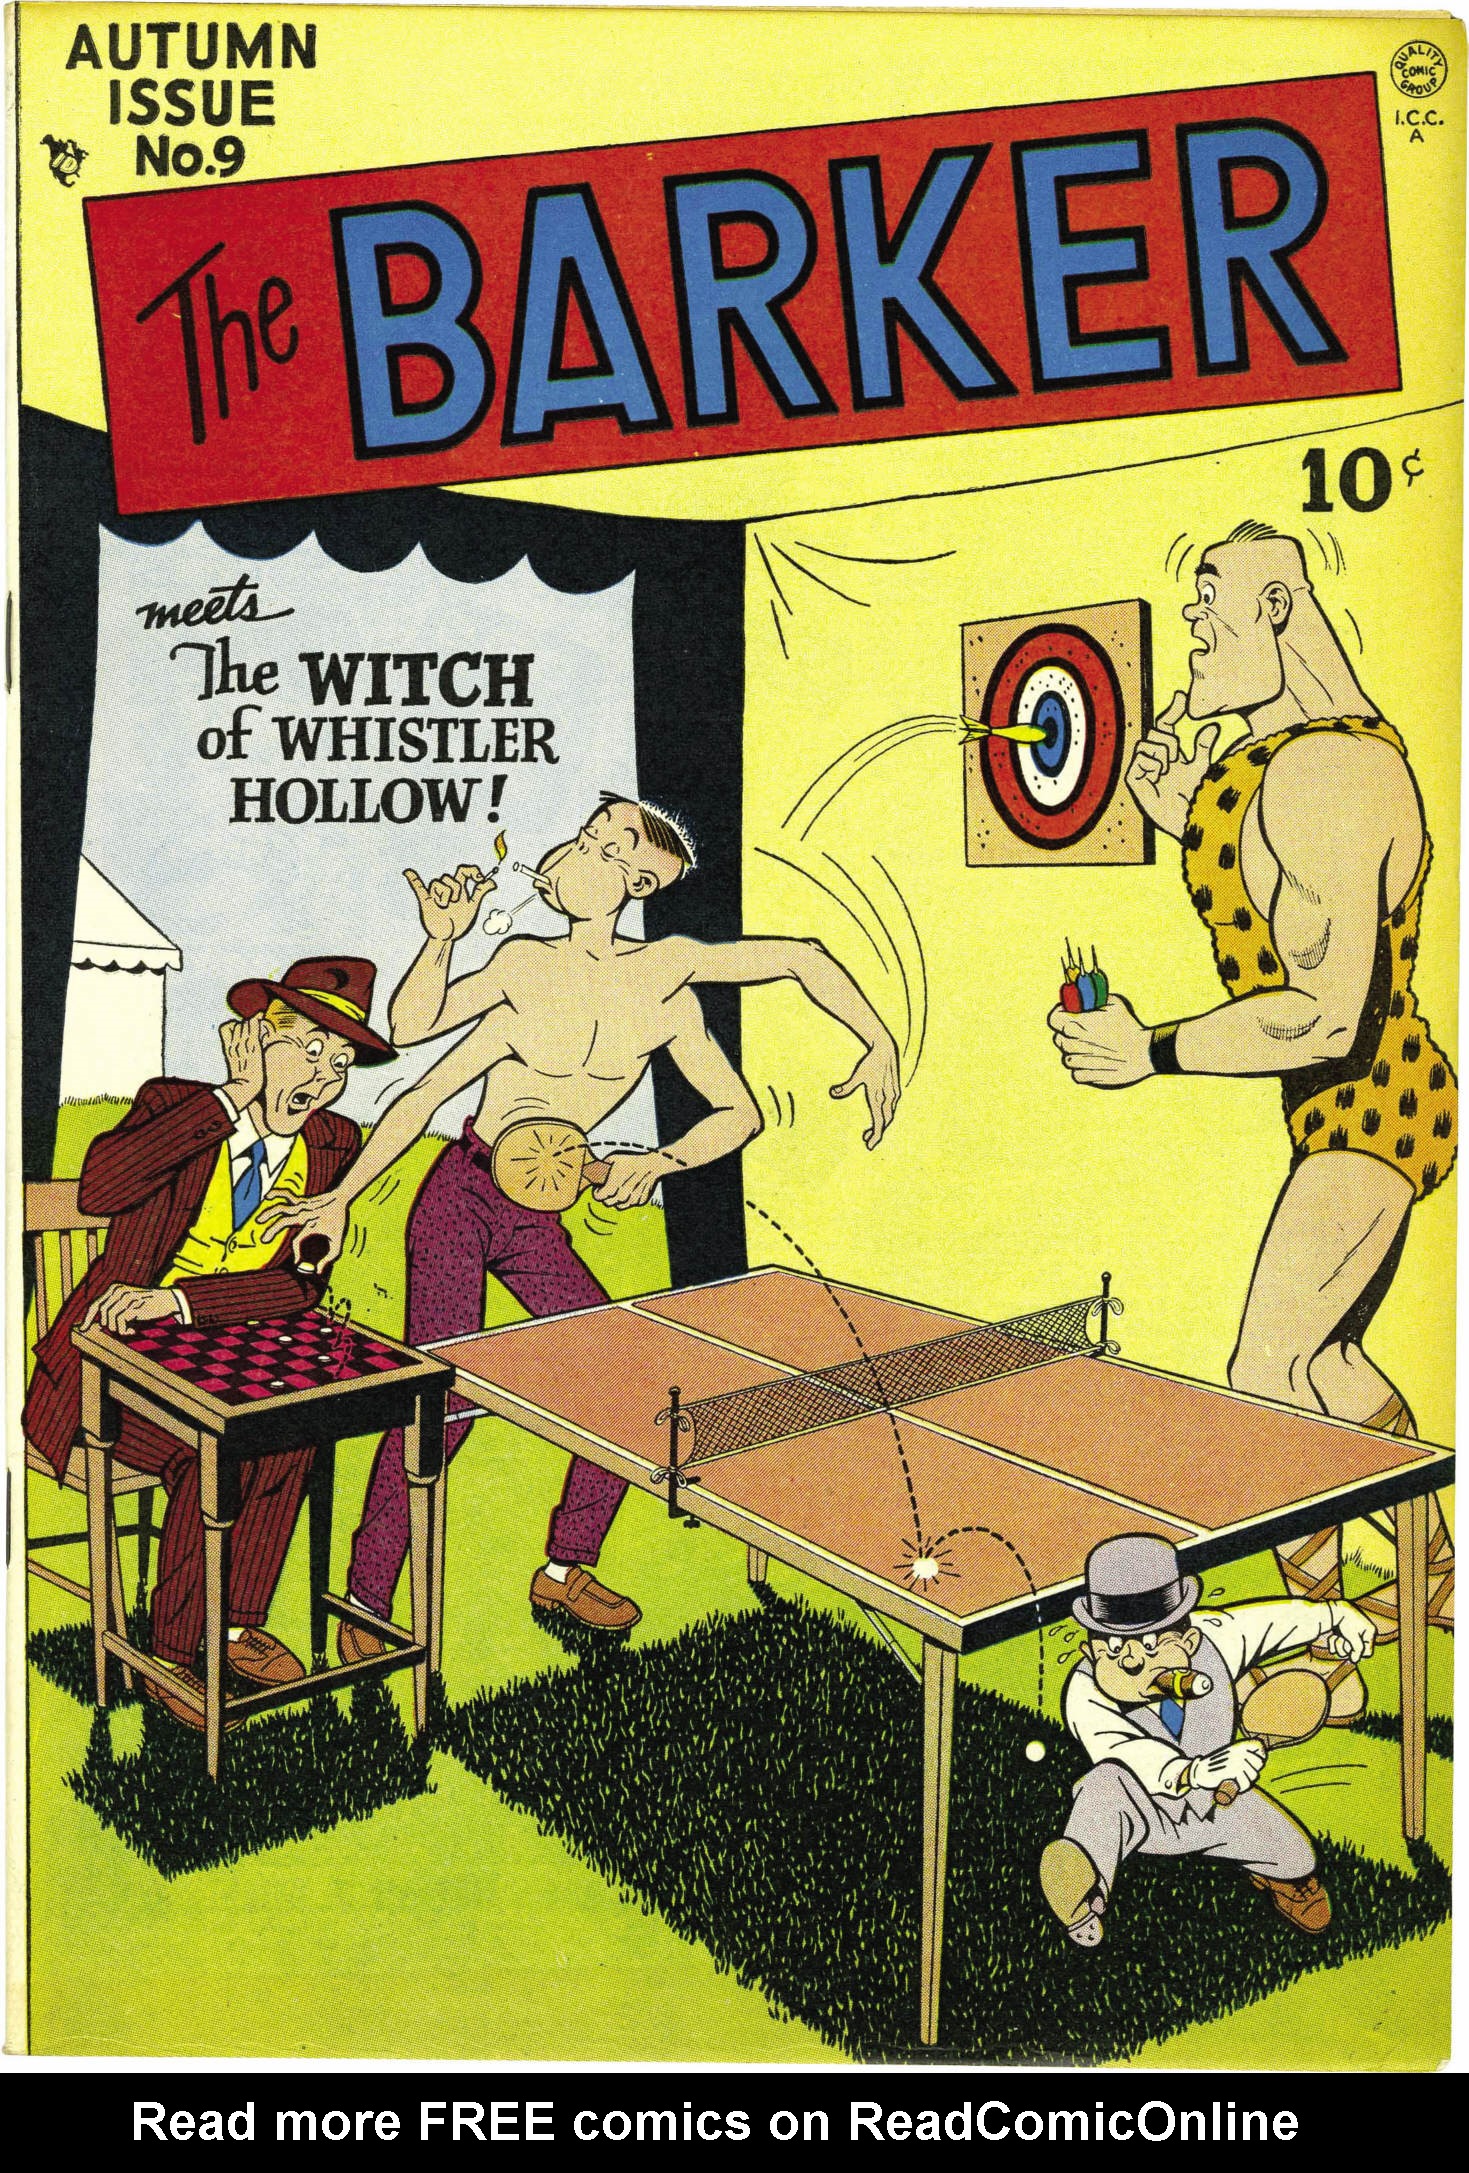 Read online Barker comic -  Issue #9 - 1